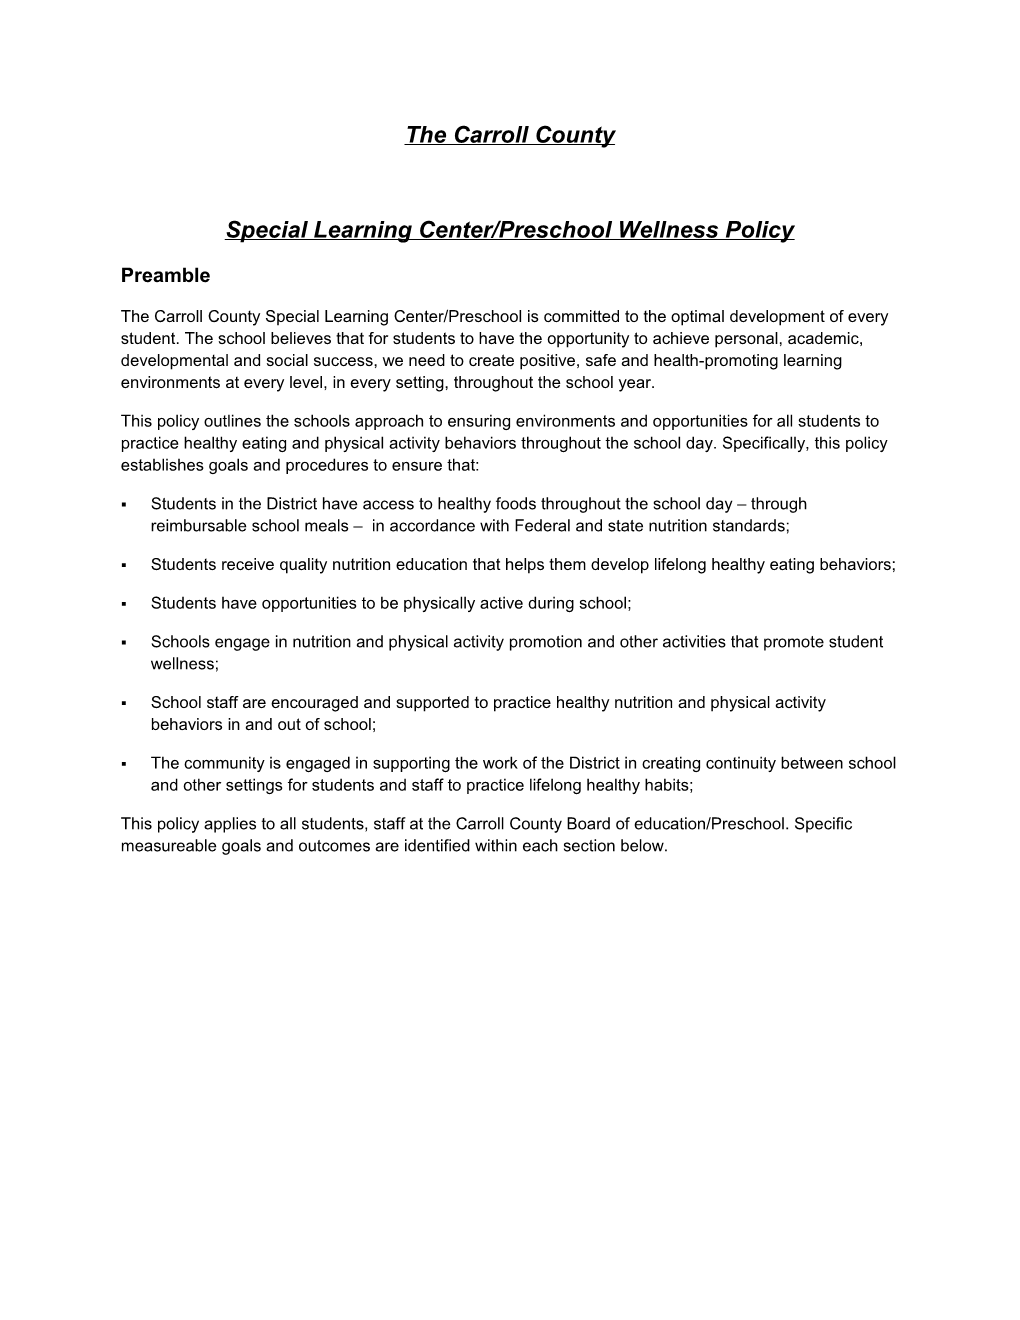 Special Learning Center/Preschool Wellness Policy